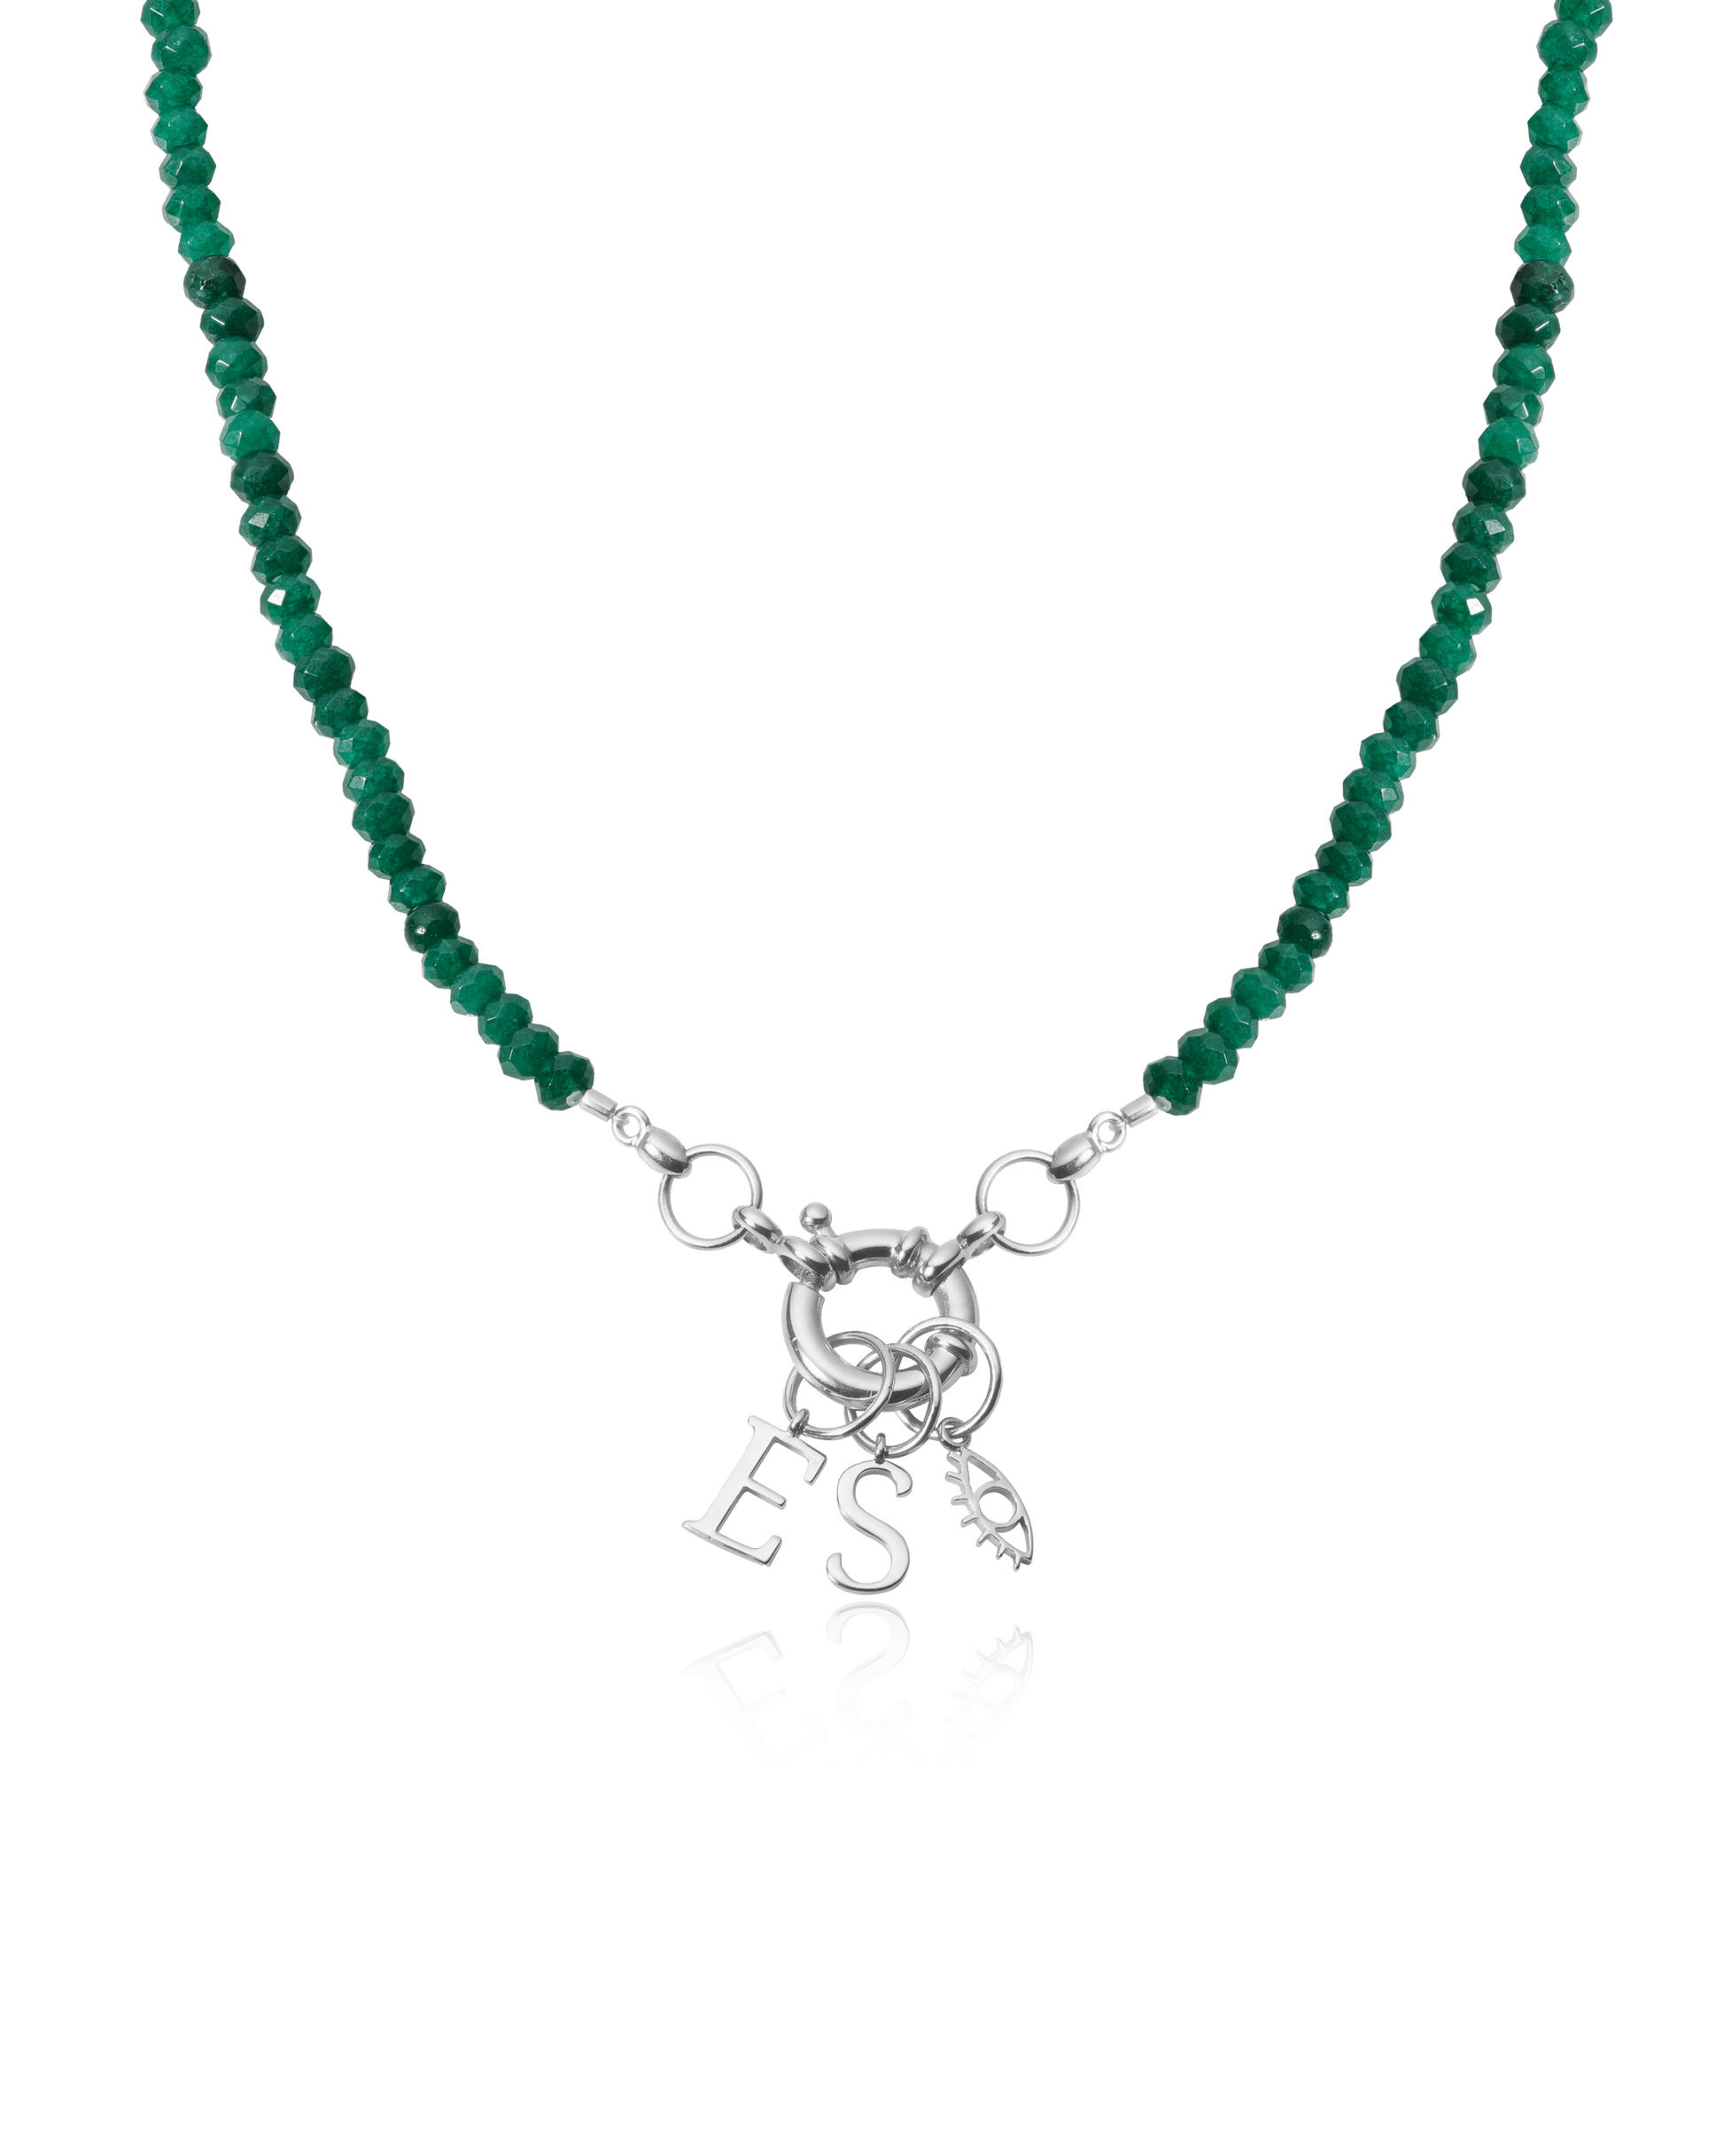 Green Jade Charm Lock Necklace - 925 Sterling Silver Necklaces magal-dev Green Jade Gemstones 1 Charm 16"